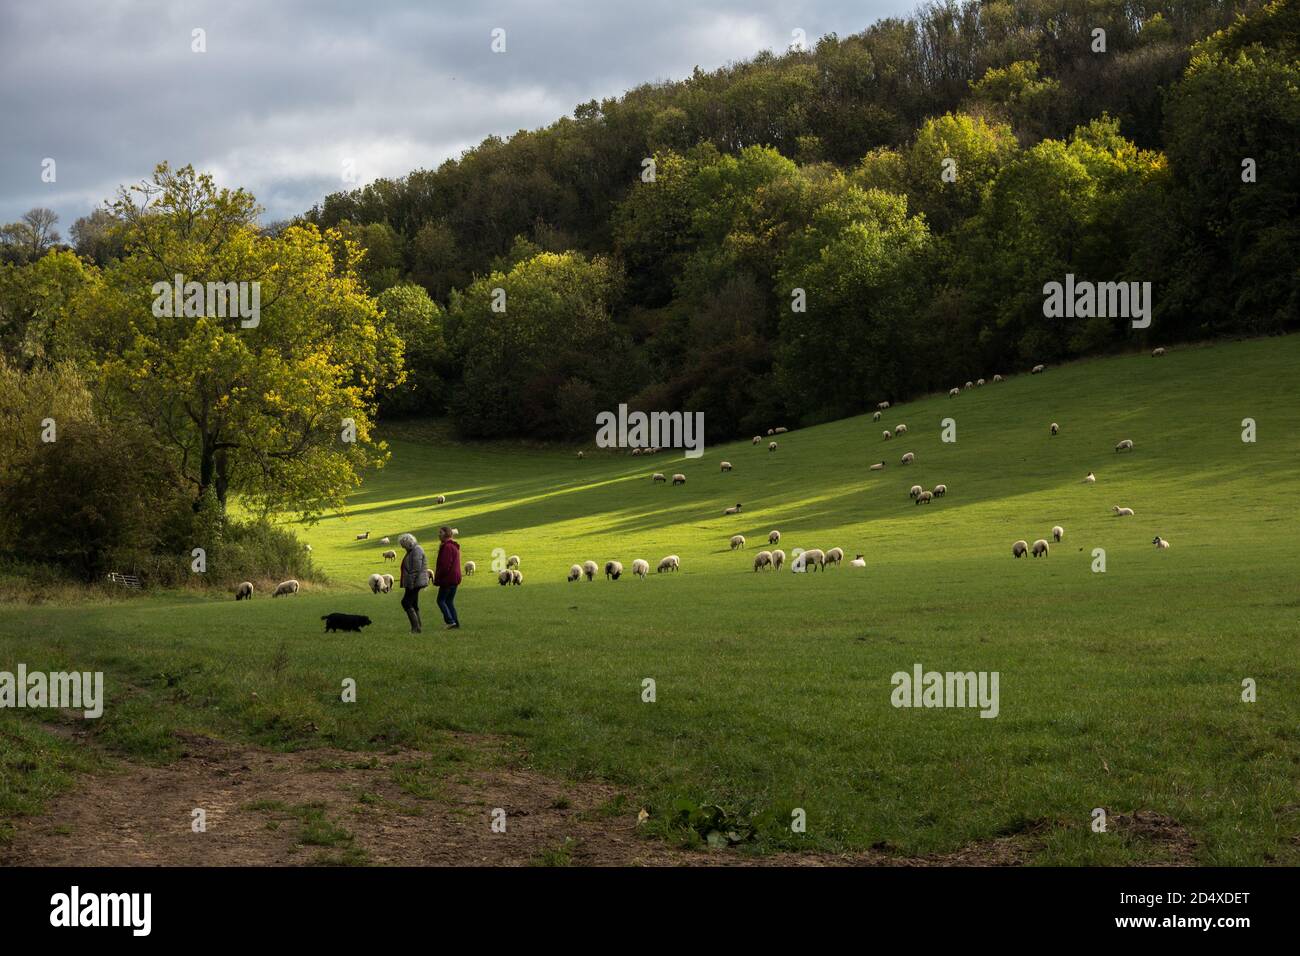 SOuth Downs, East Susses, UK. 11 October 2020. Two hikers walking their dog which is off the lead in a field of sheep on the South Downs, Credit: Sarah Mott/Alamy Live News Stock Photo